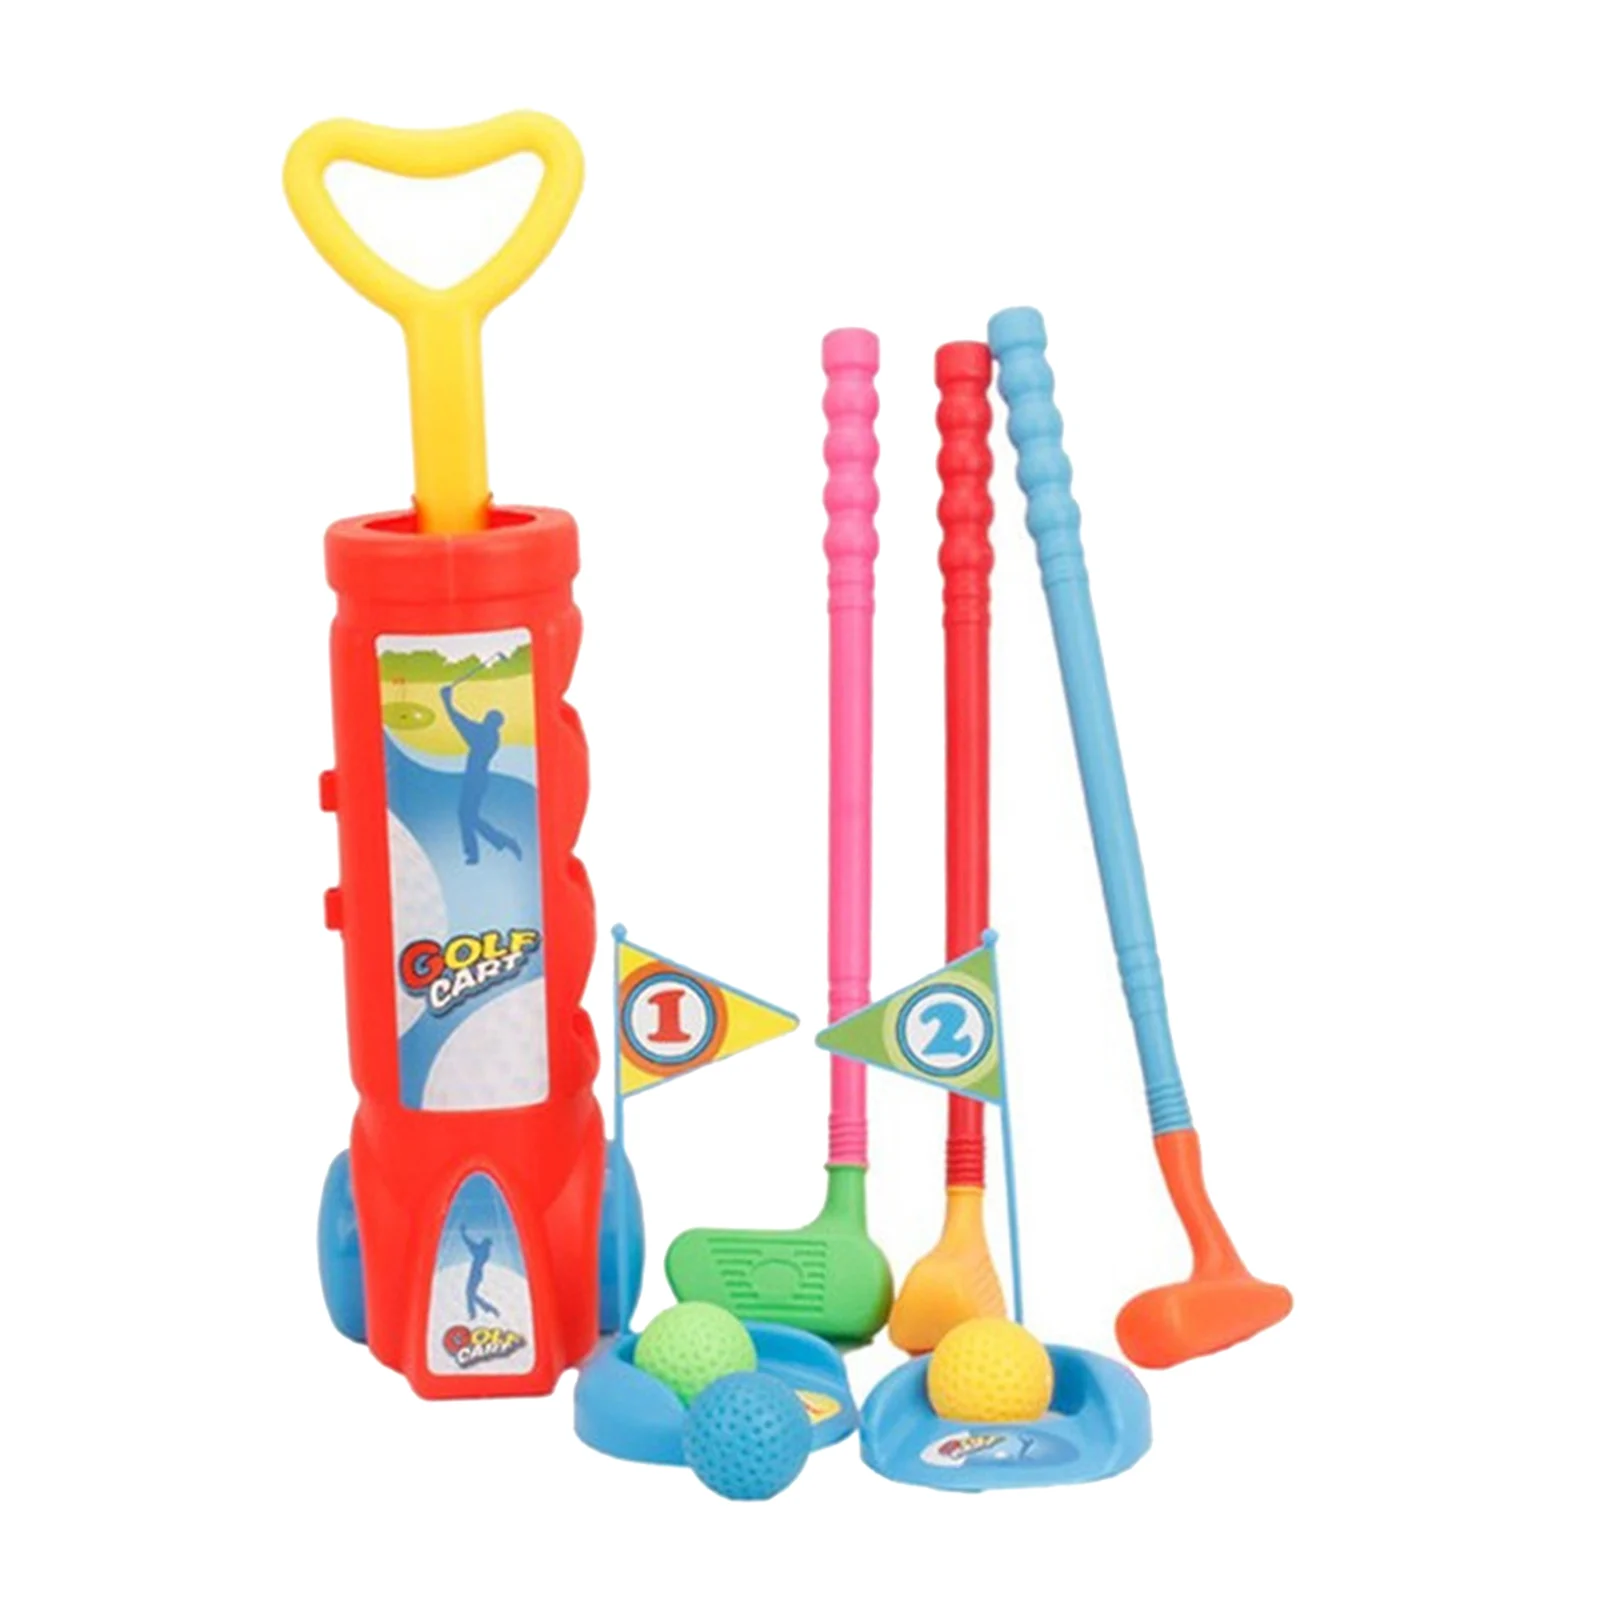 Children Kids Outdoor Sports Games Toys Multicolor Plastic Mini Golfer Club Set Toddler Educational Outdoors